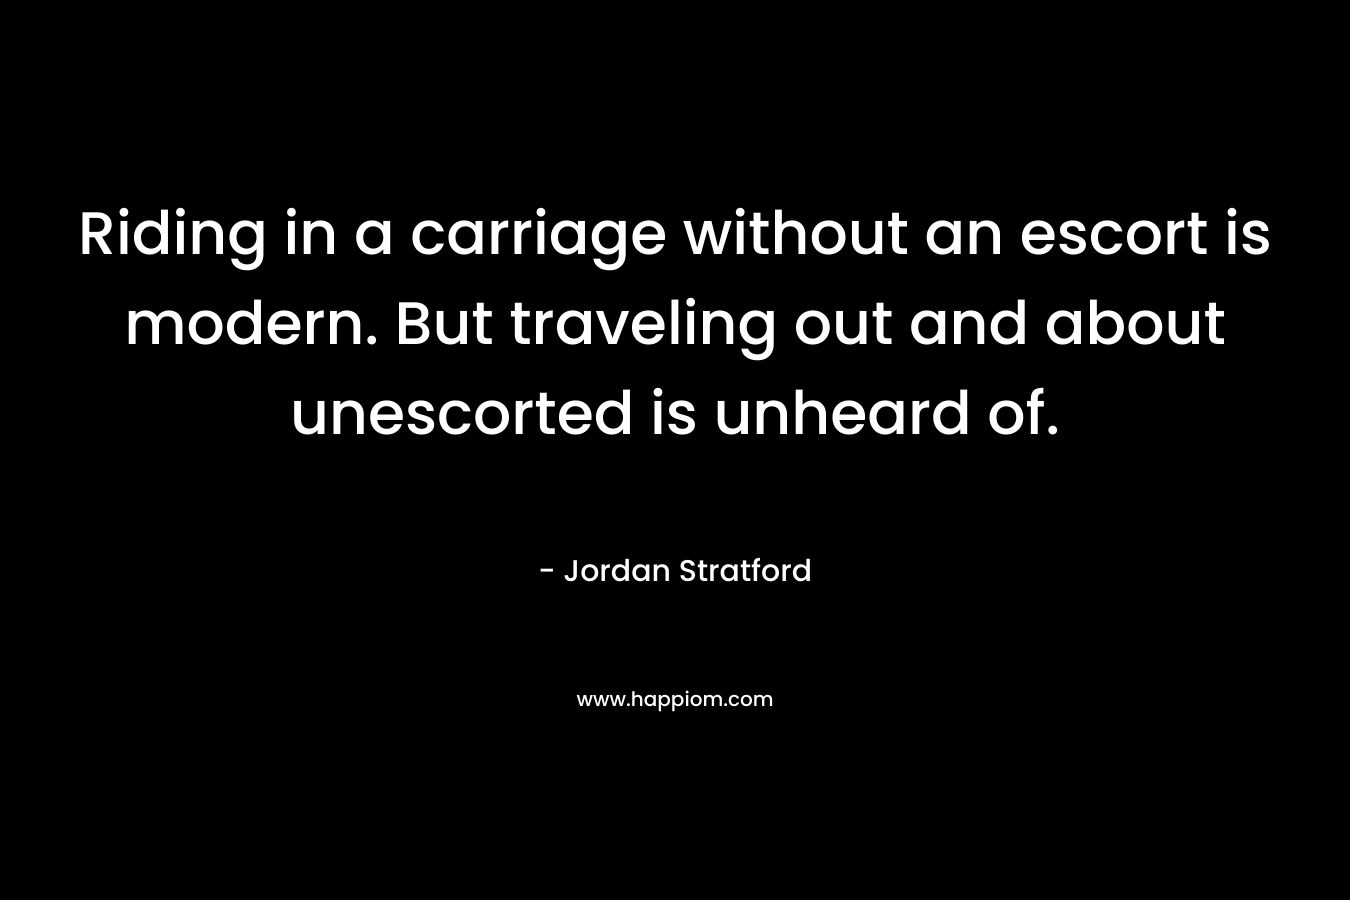 Riding in a carriage without an escort is modern. But traveling out and about unescorted is unheard of.